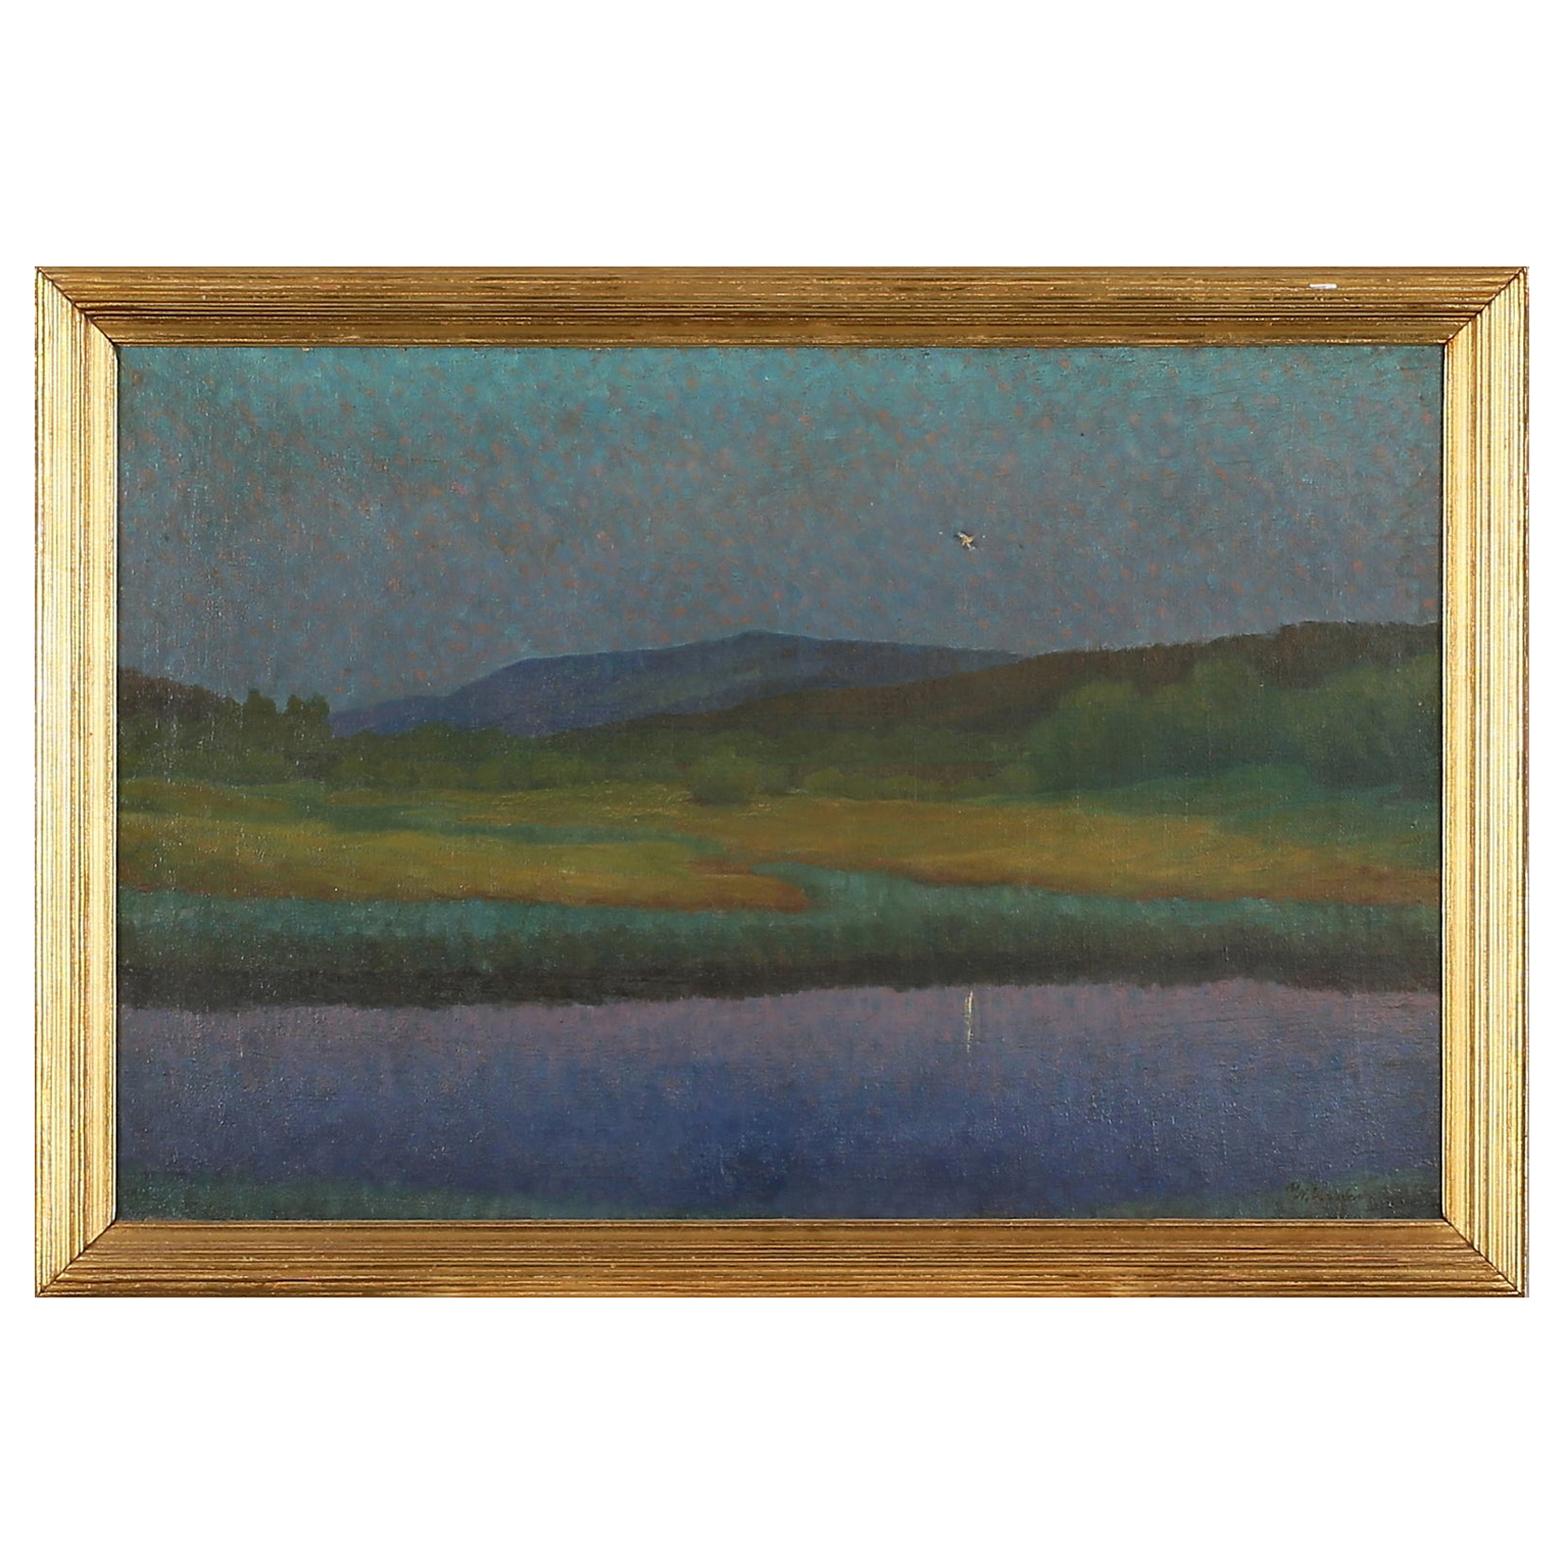 Oil Painting on Canvas of Twilight over Landscape by Unknown Artist